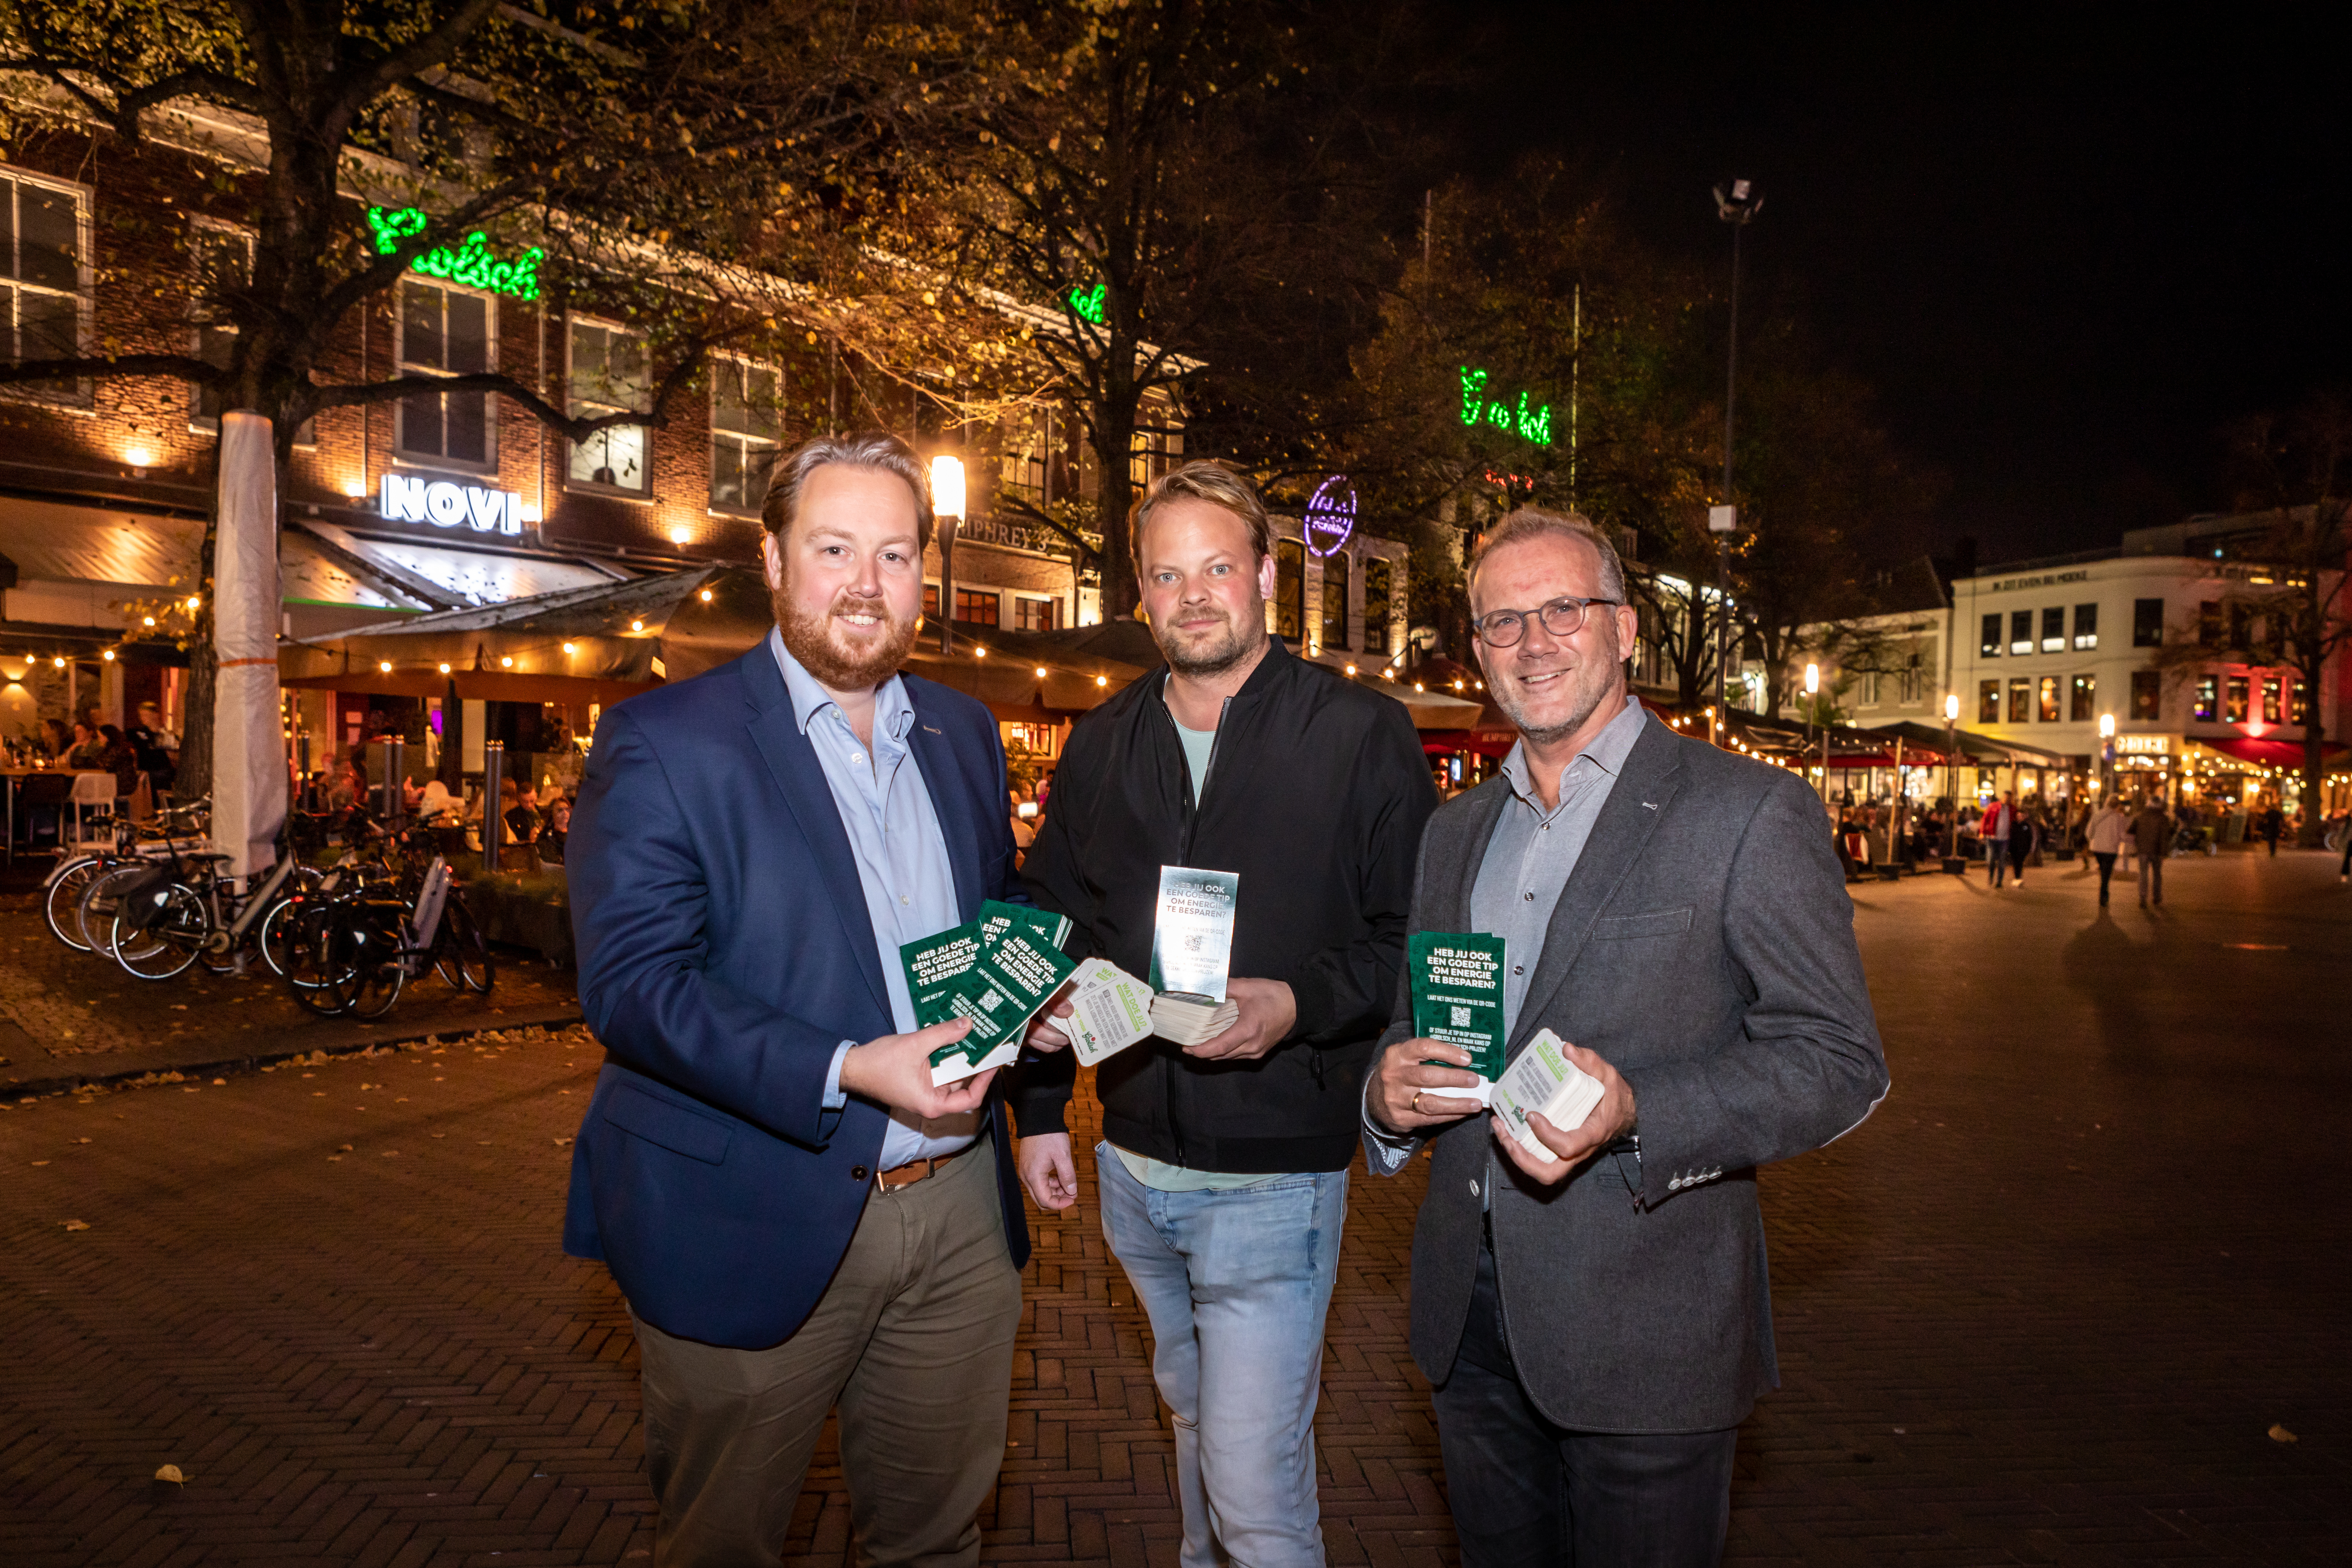 Grolsch & Municipality of Enschede 'Flip the switch too'!